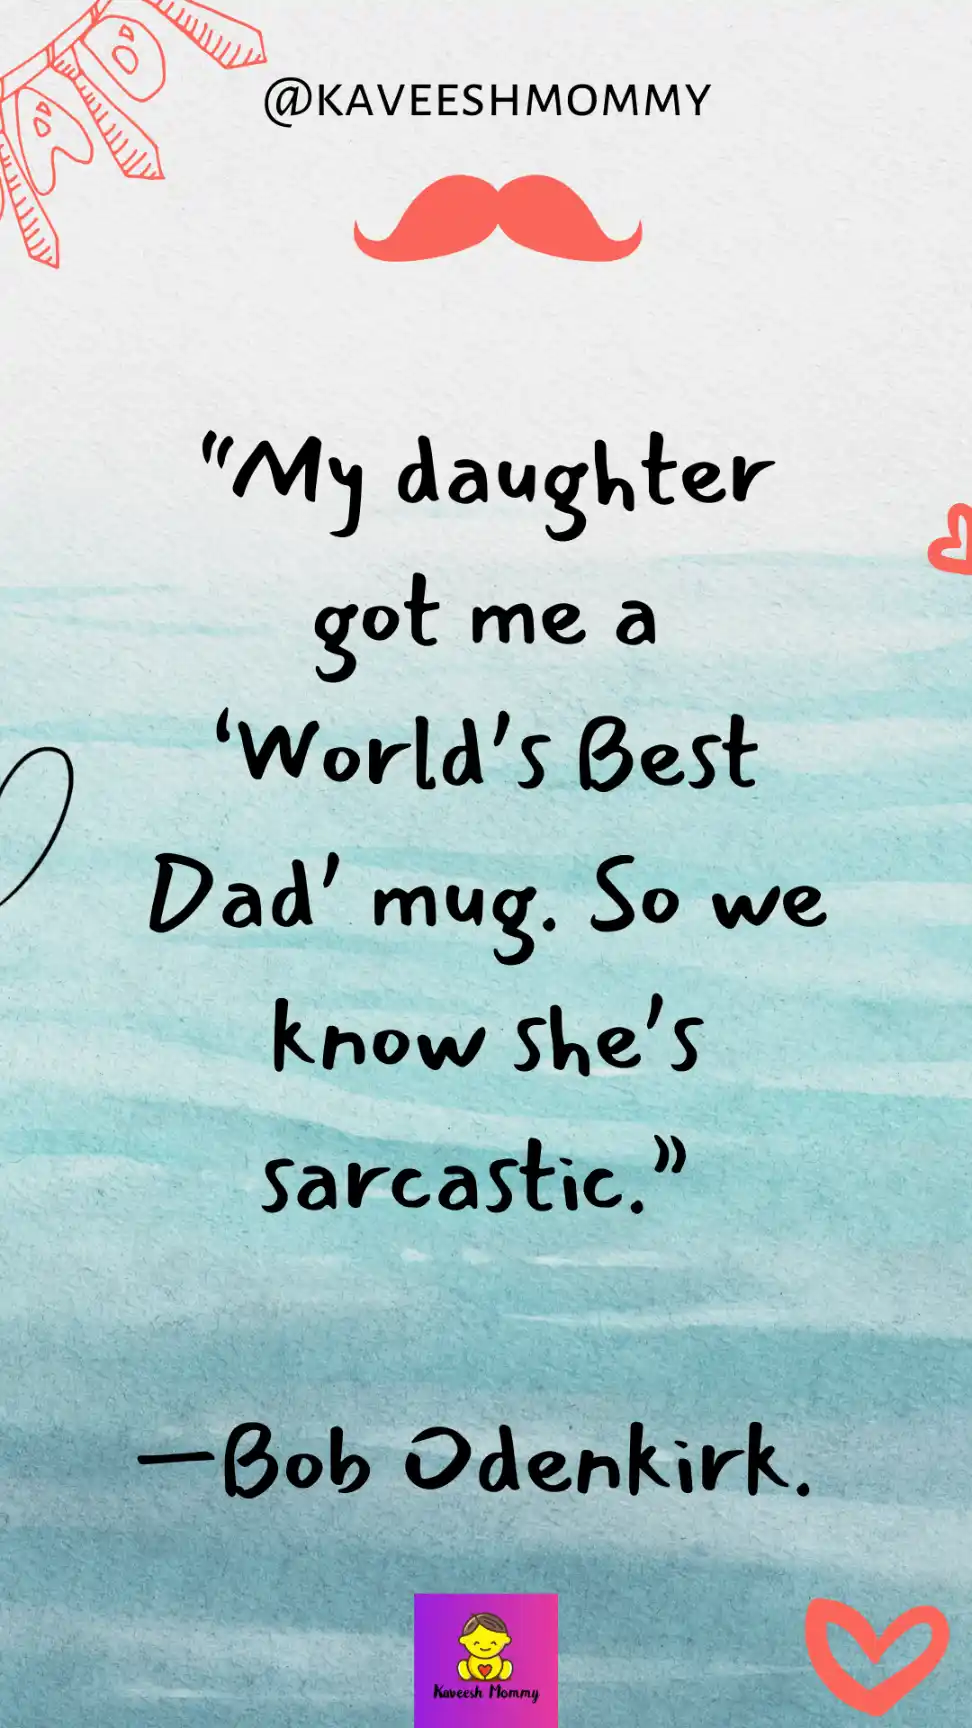 Funny Dad Quotes For a Laugh on Father's Day-kaveesh mommy-